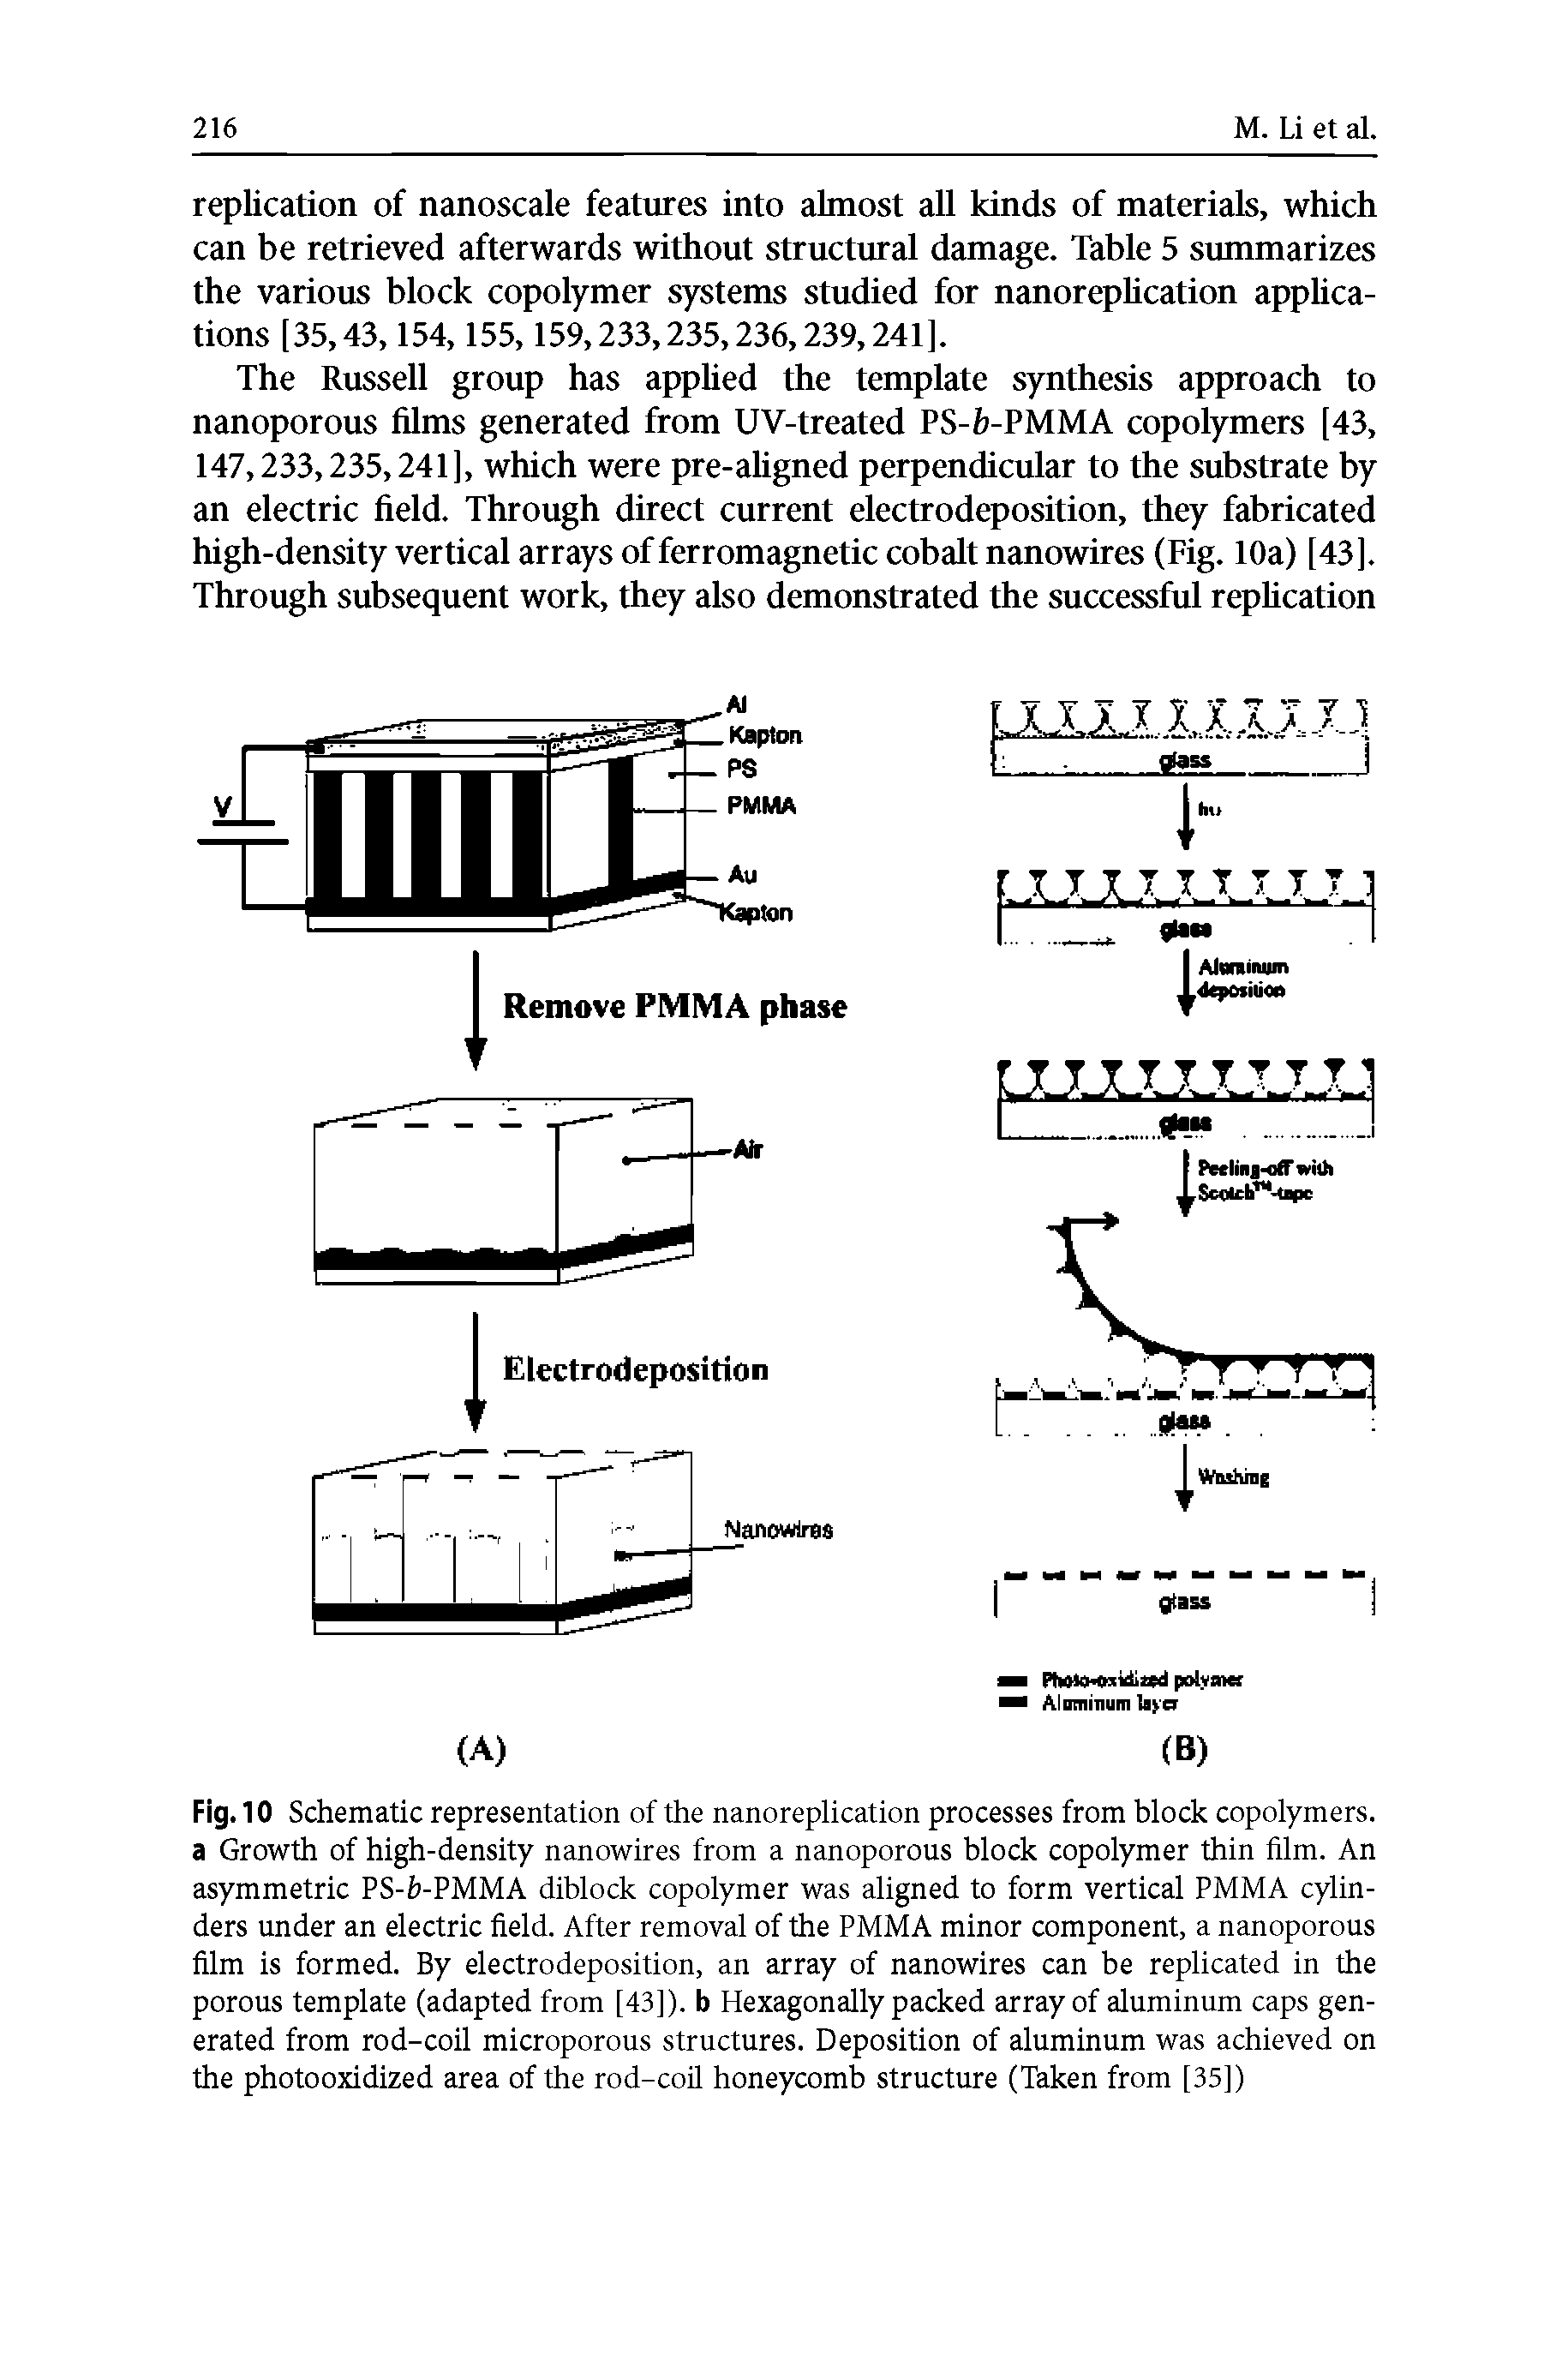 Fig. 10 Schematic representation of the nanoreplication processes from block copolymers, a Growth of high-density nanowires from a nanoporous block copolymer thin film. An asymmetric PS-fc-PMMA diblock copolymer was aligned to form vertical PMMA cylinders under an electric field. After removal of the PMMA minor component, a nanoporous film is formed. By electrodeposition, an array of nanowires can be replicated in the porous template (adapted from [43]). b Hexagonally packed array of aluminum caps generated from rod-coil microporous structures. Deposition of aluminum was achieved on the photooxidized area of the rod-coil honeycomb structure (Taken from [35])...